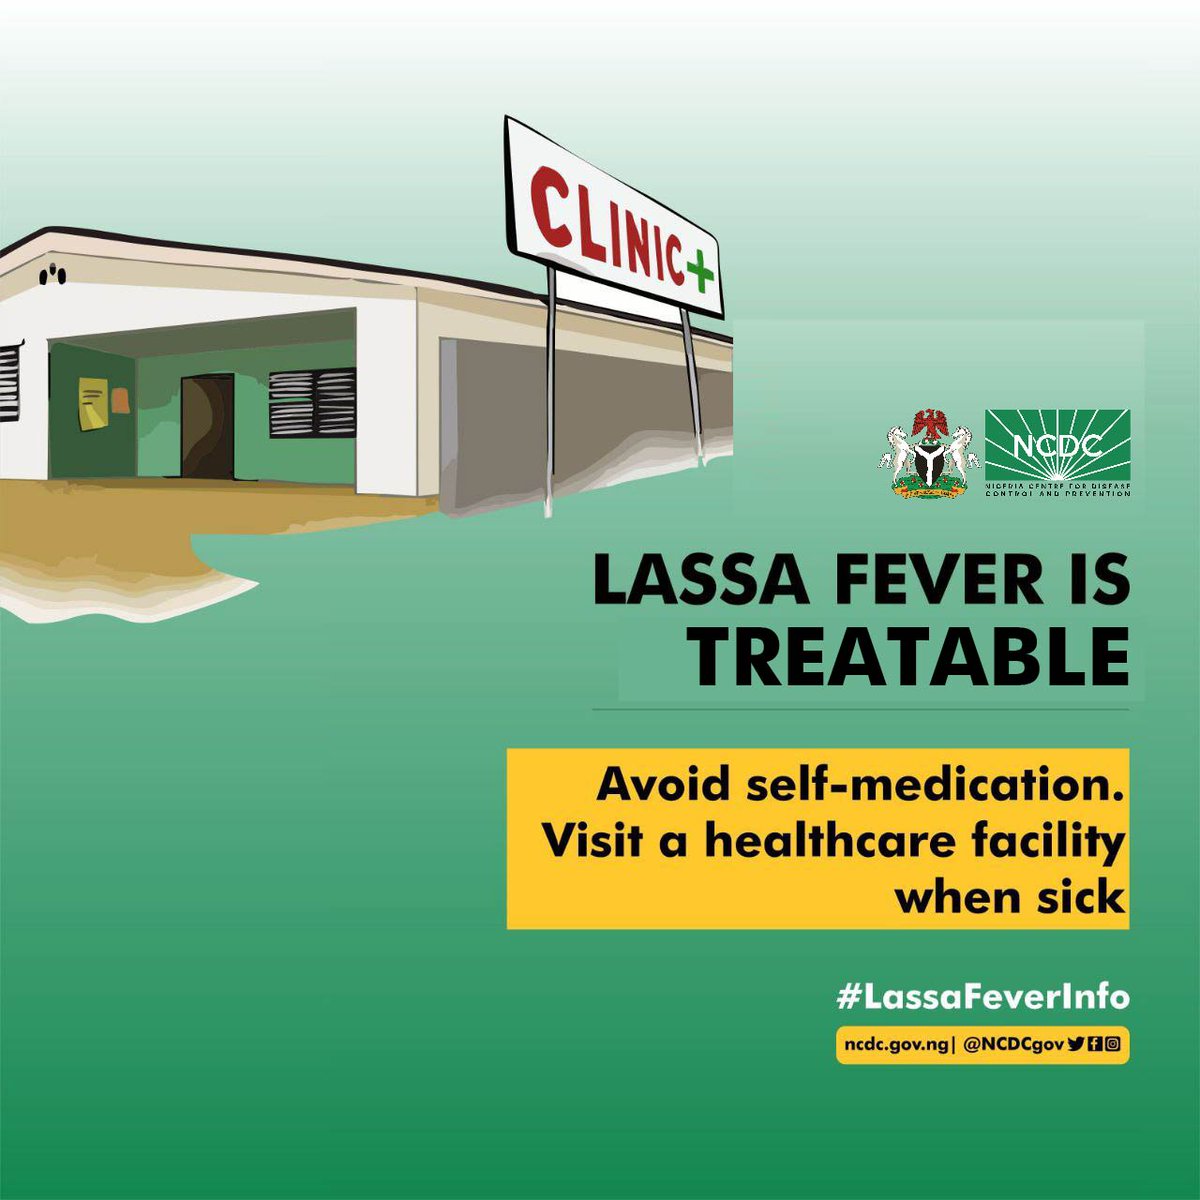 Not all fevers are malaria! Report early to a healthcare facility when experiencing #LassaFever-associated symptoms. Early symptoms of #LassaFever include fever, body weakness, sore throat, muscle & chest pain, nausea, vomiting, diarrhoea, cough & abdominal pain.